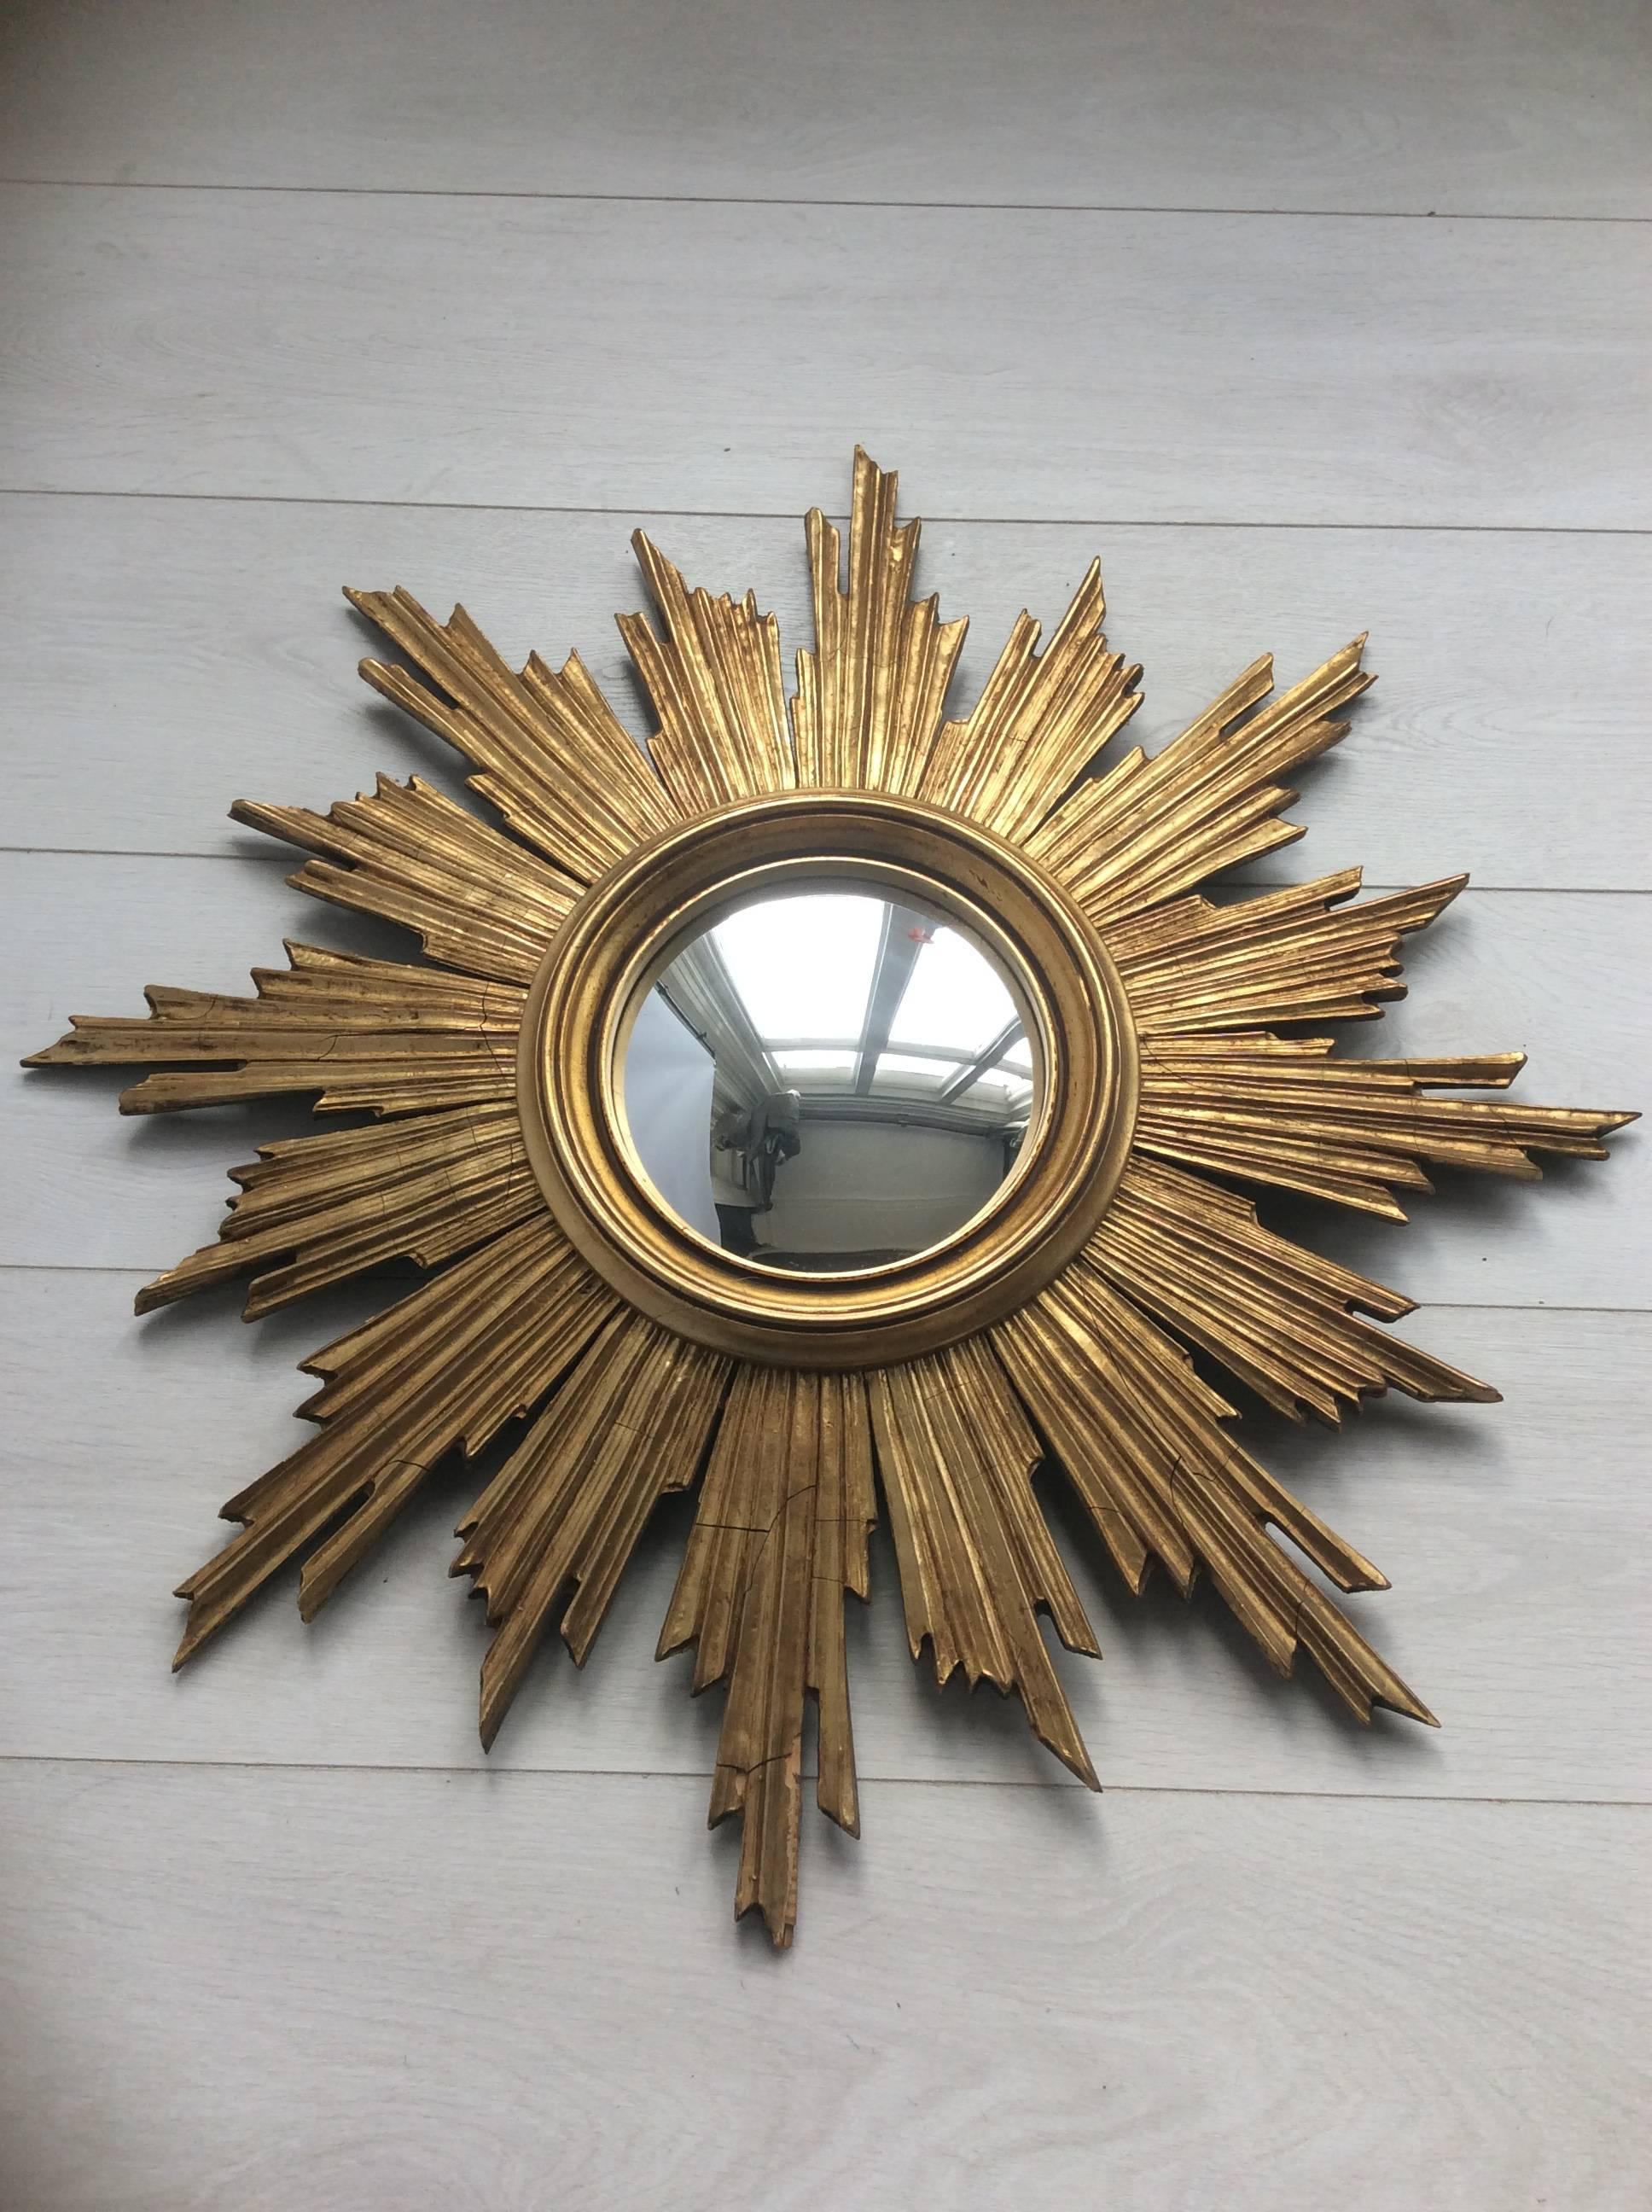 Beautiful colouring and patination to this giltwood sunburst mirror.

With original convex glass.

Small chip of one tip as per close up images, priced accordingly.

70cm across

Belgium, circa 1950.